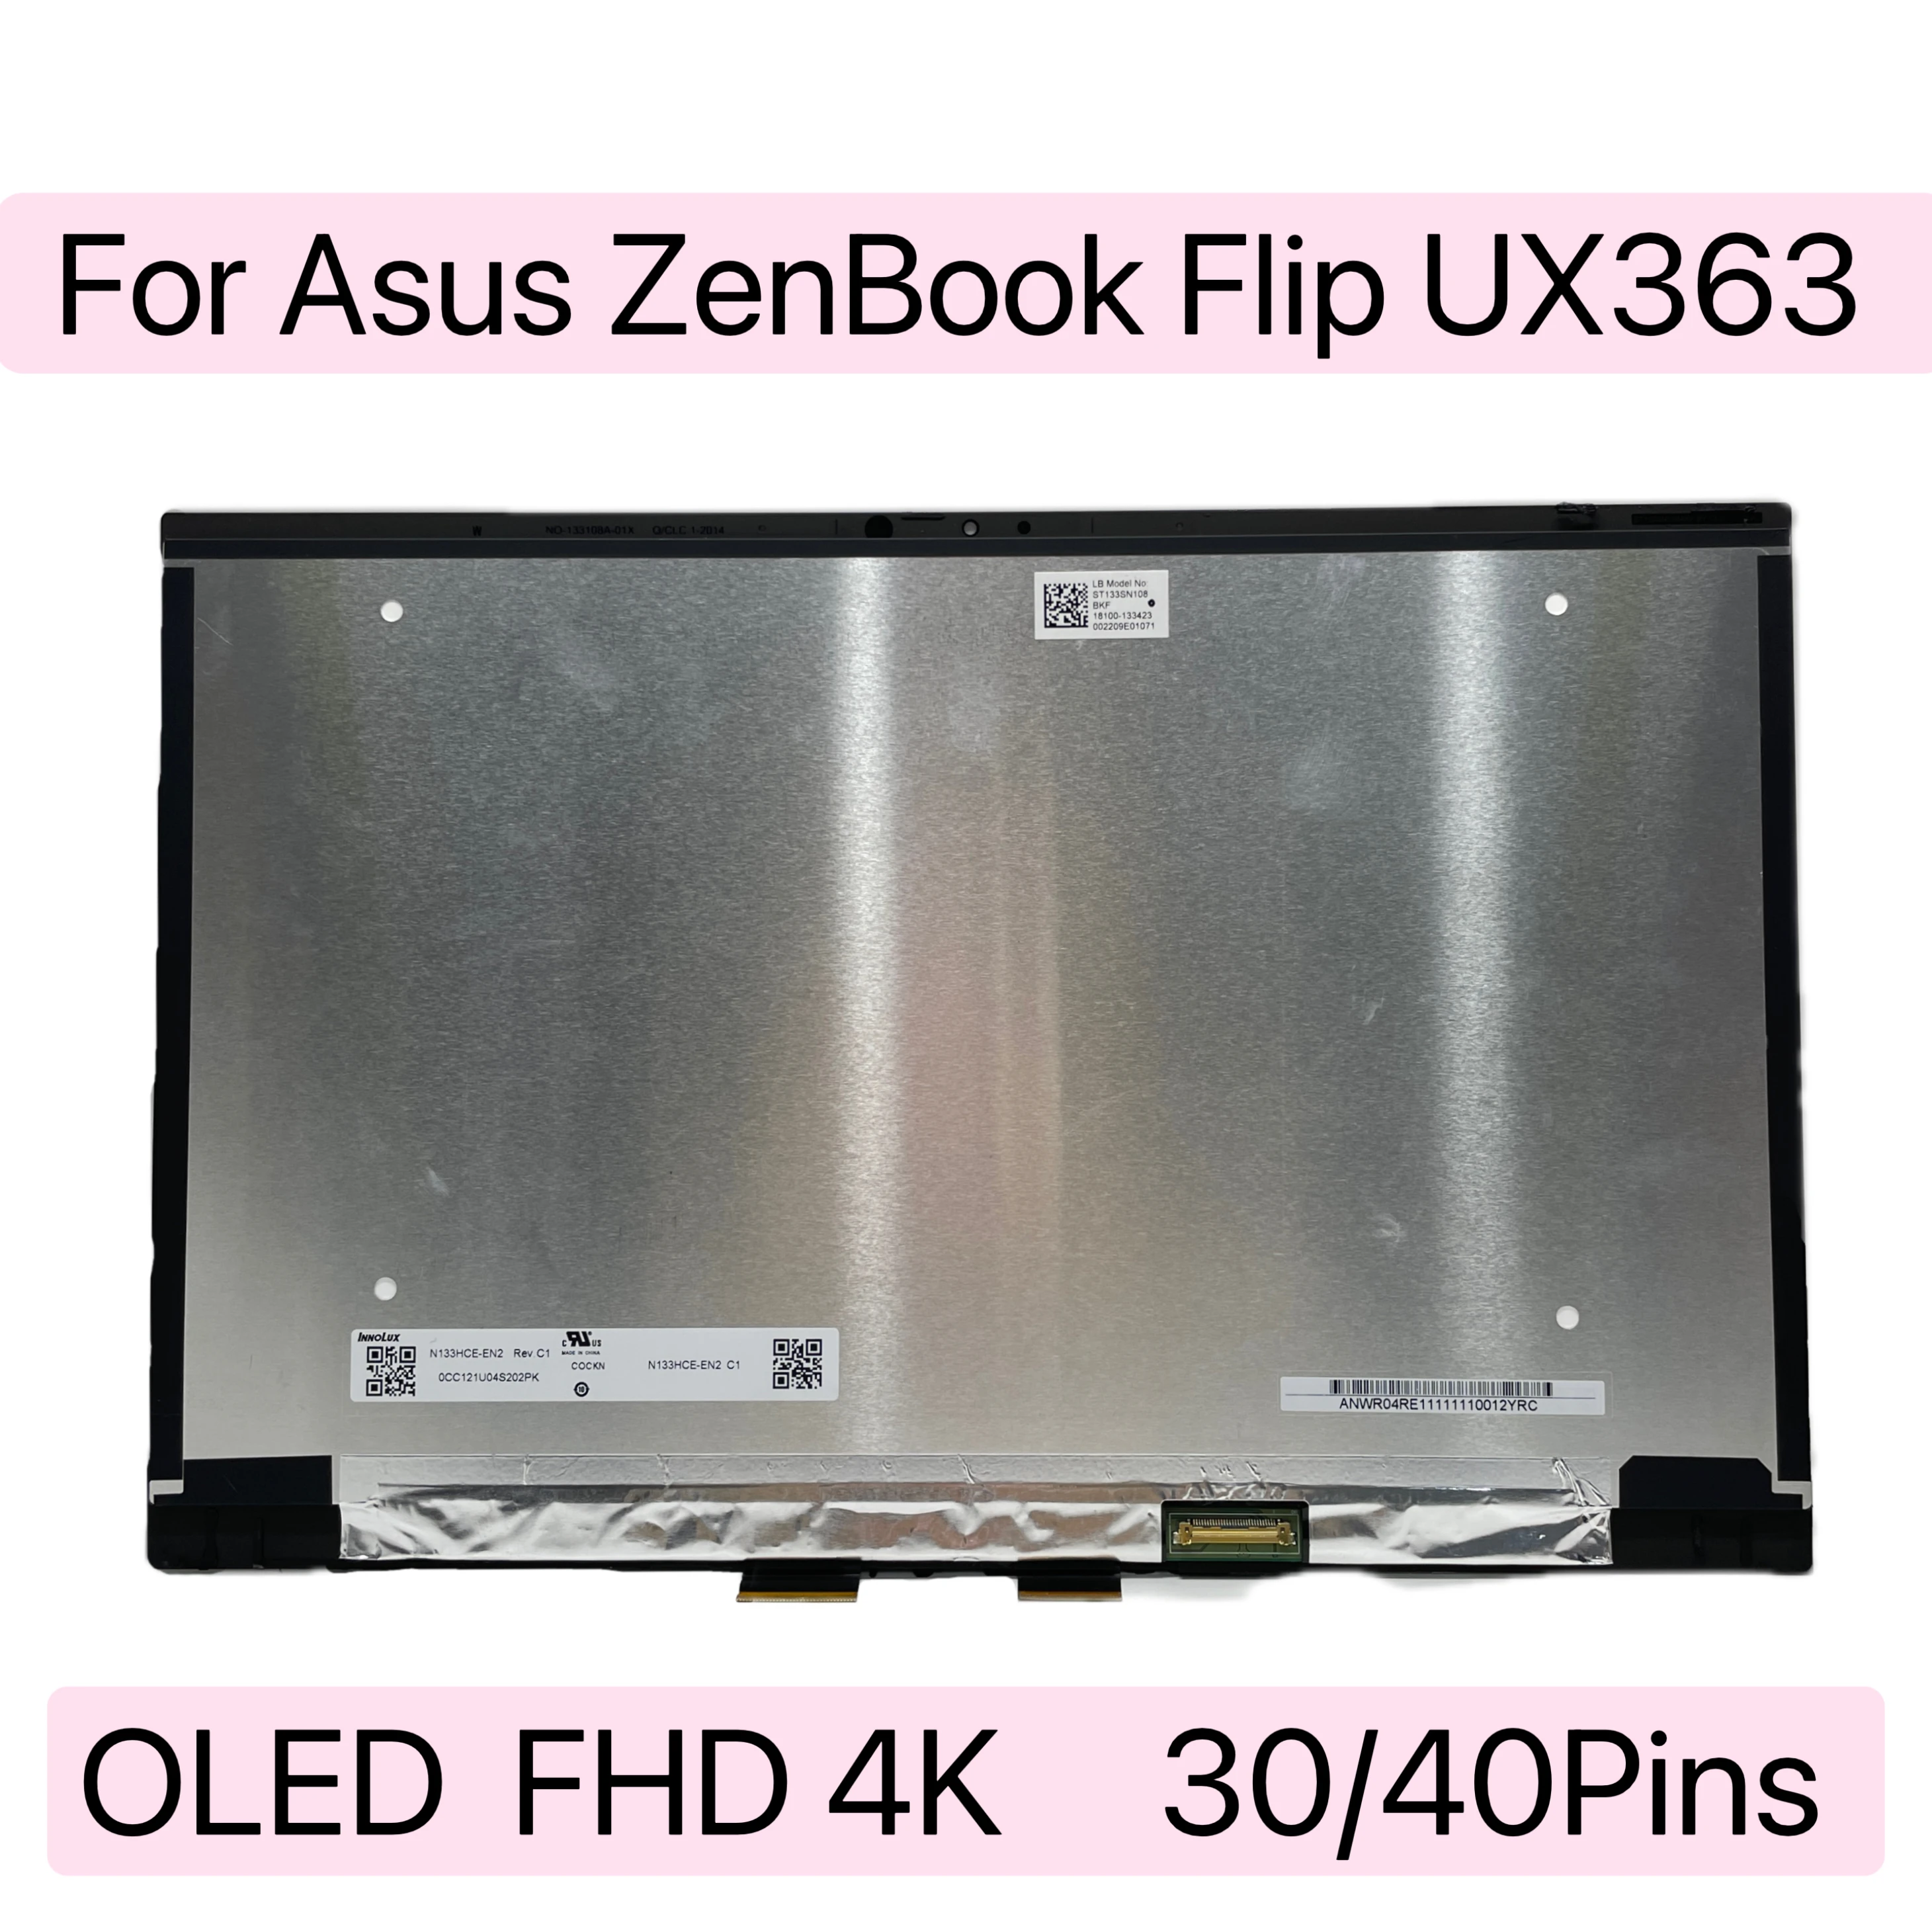 

For ASUS ZenBook Flip UX363 UX363ja UXF3000E LCD Touch Screen Digitizer Complete Assembly ATNA33XC11 4k FHD OLED 13.3"